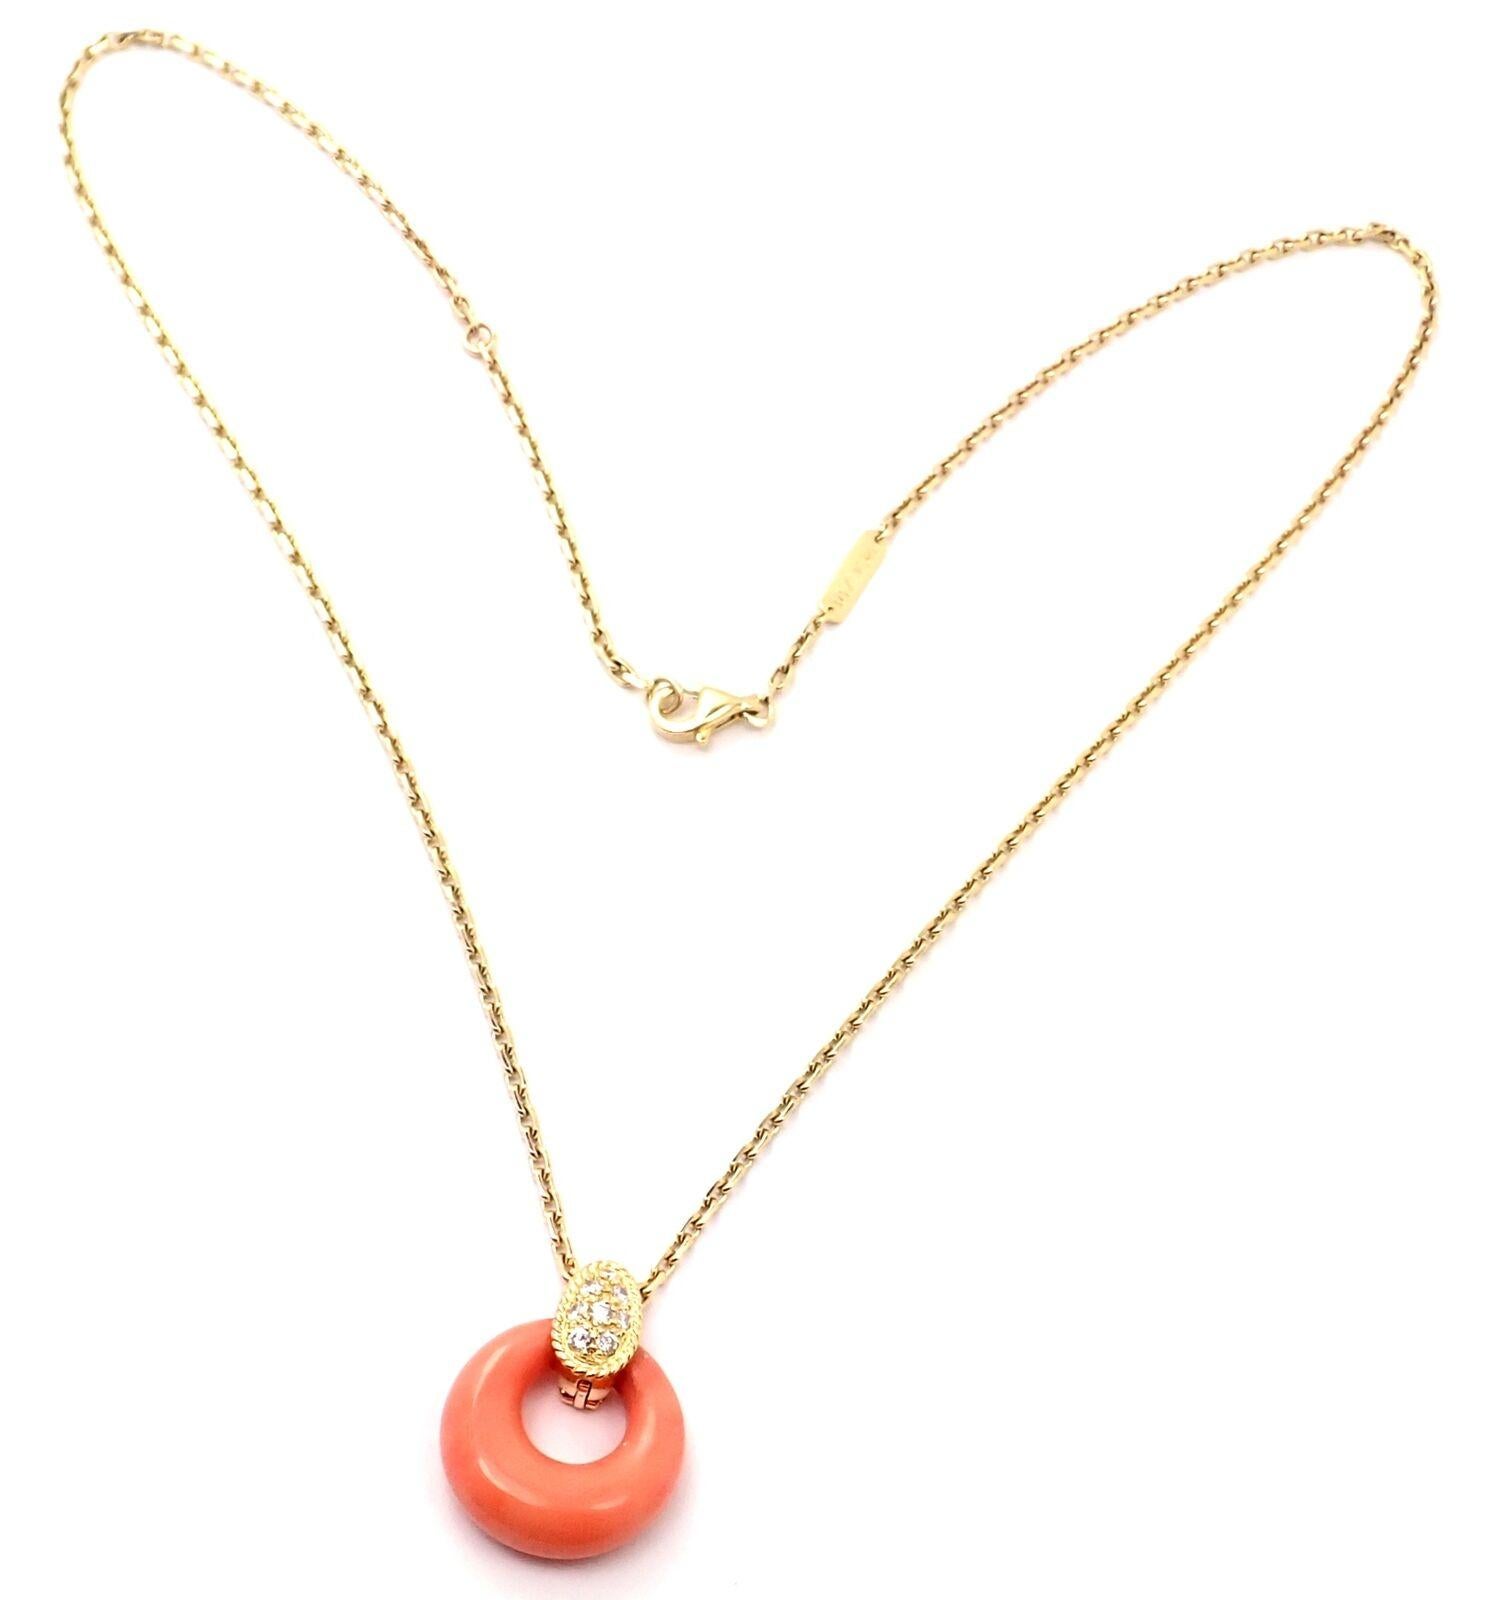 18k Yellow Gold Diamond Coral Pendant Necklace by Van Cleef & Arpels
With 8 round brilliant cut diamonds total weight approx. .22ct 
1 coral
Details:
Measurements: Chain Length 17 3/4